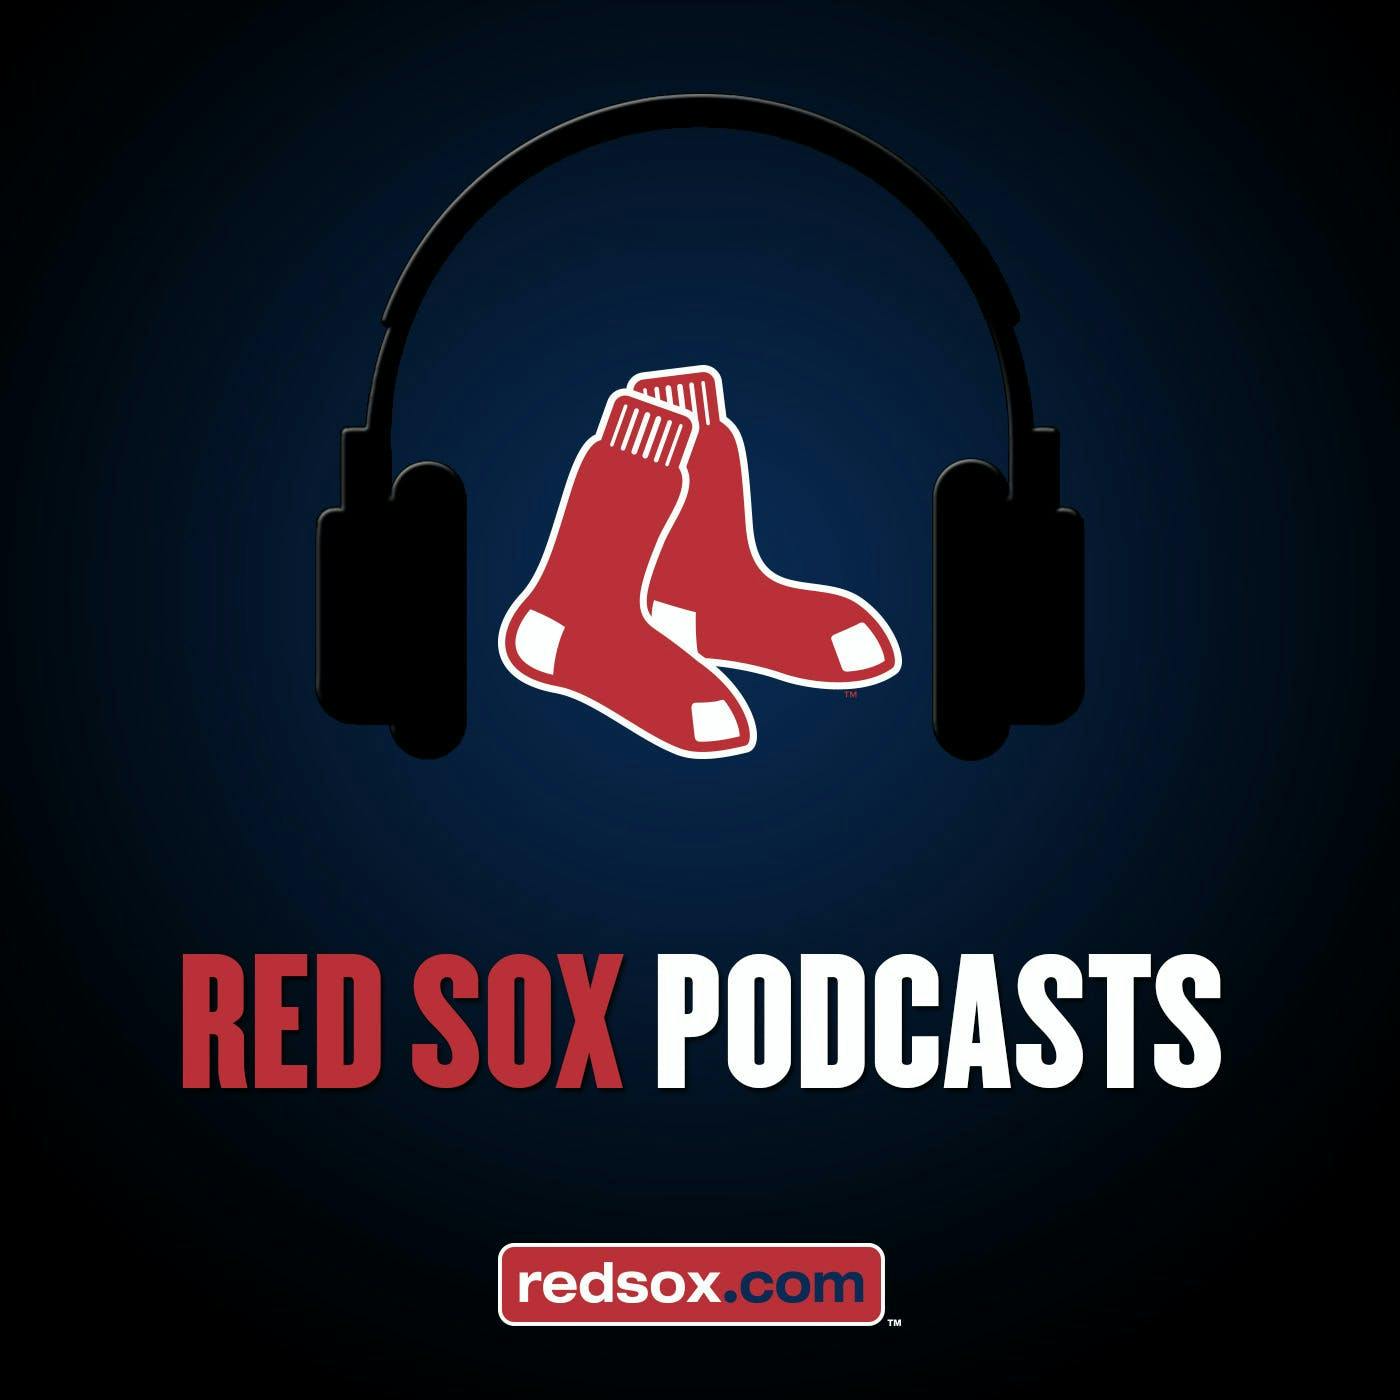 1/25/19: Red Sox Extras | Getting Ready for Spring Training